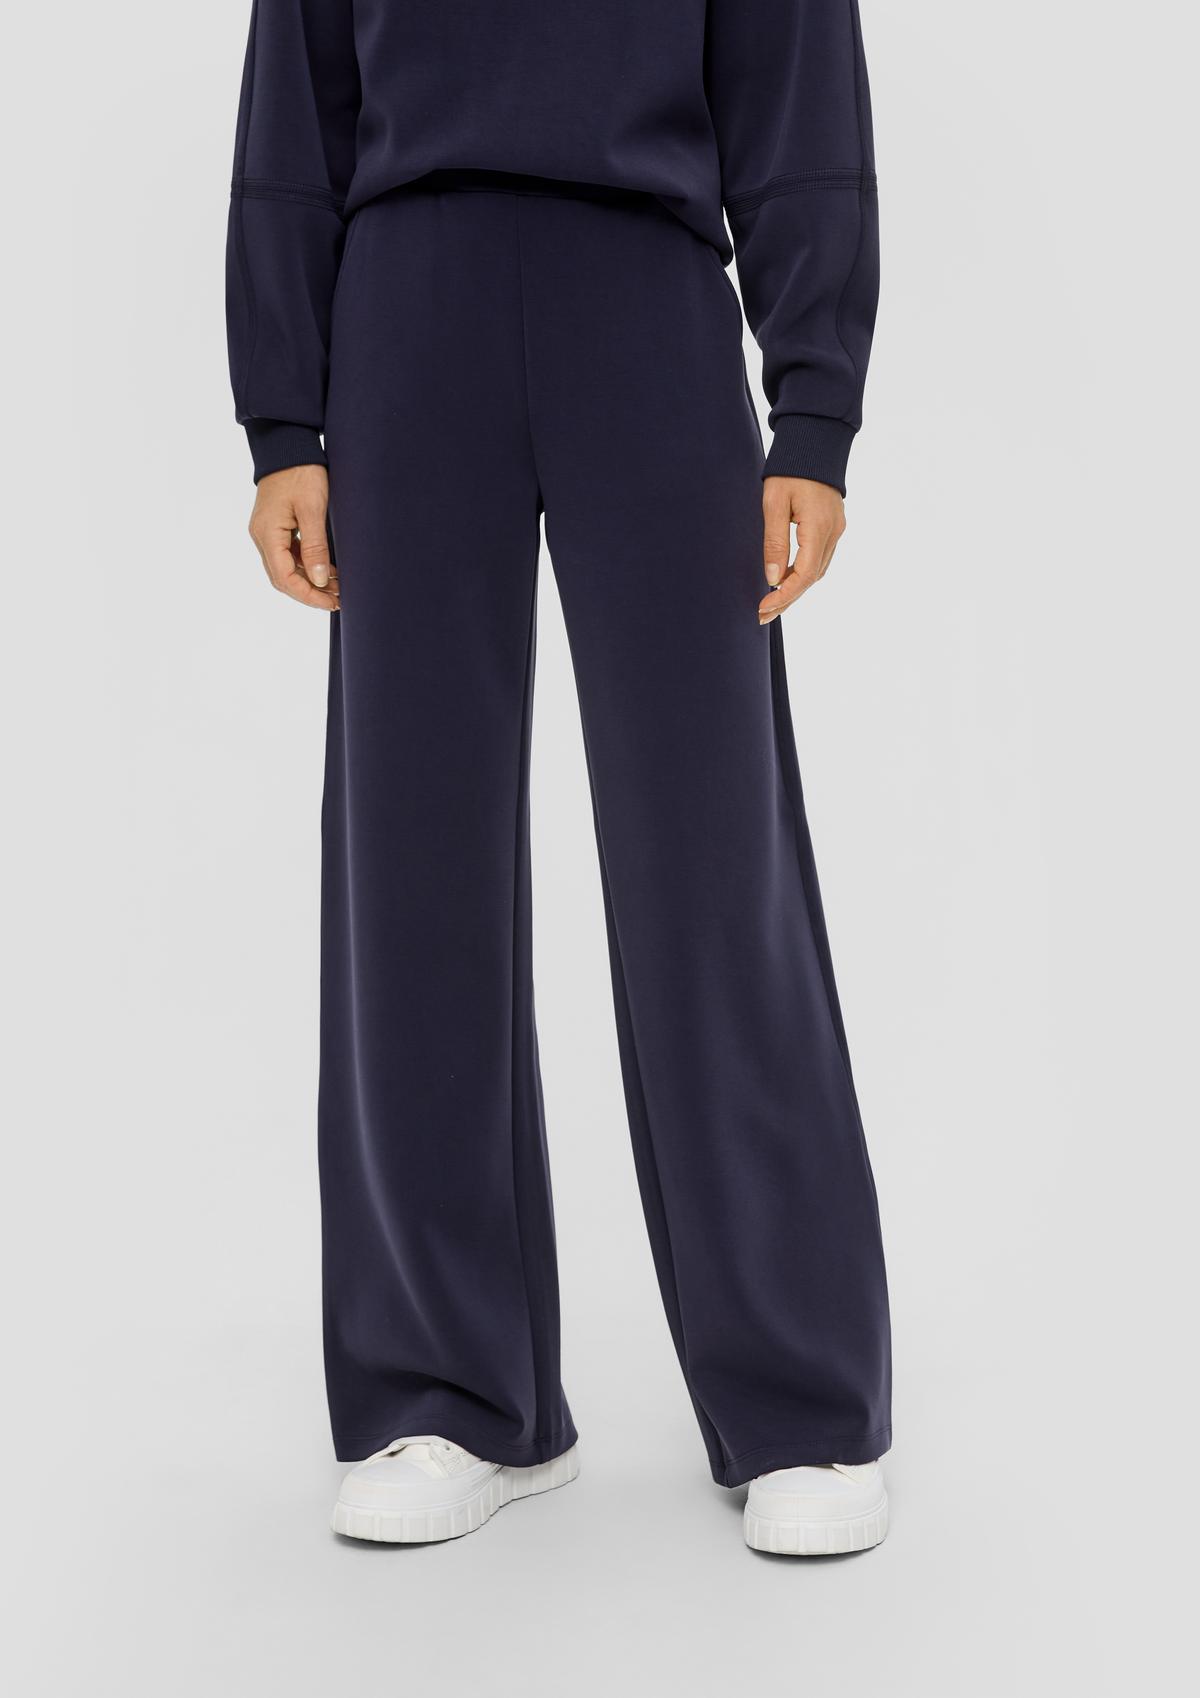 s.Oliver Scuba trousers with a wide leg